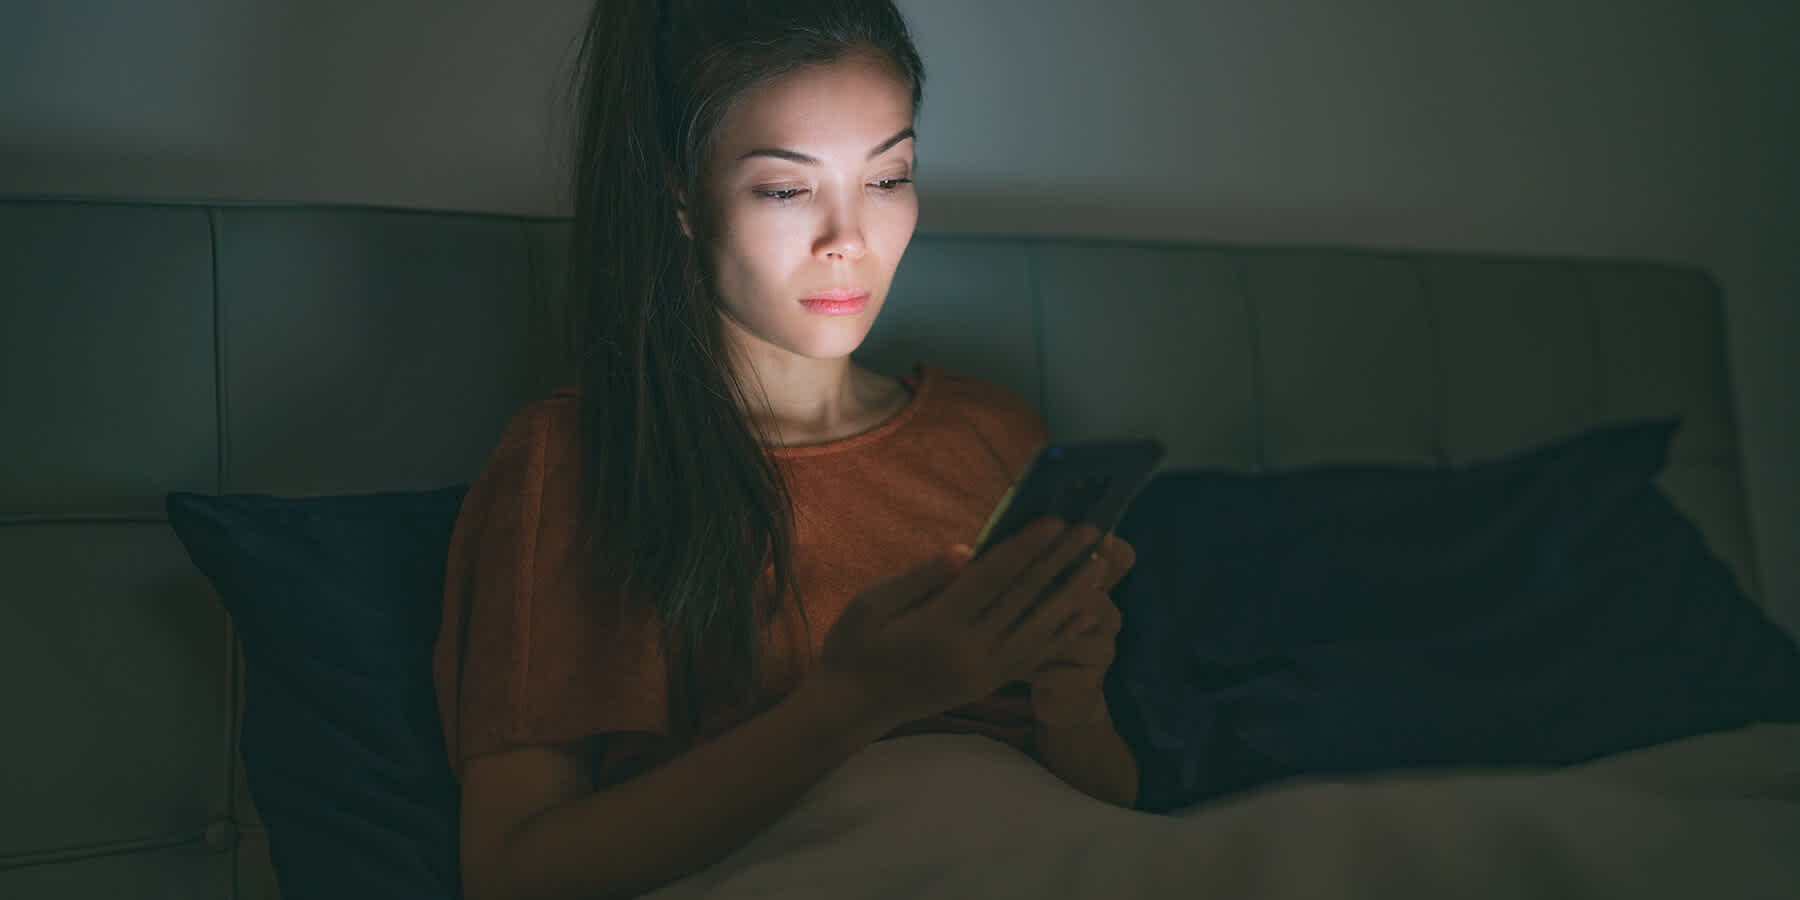 Woman staying up late browsing phone with stress caused insomnia